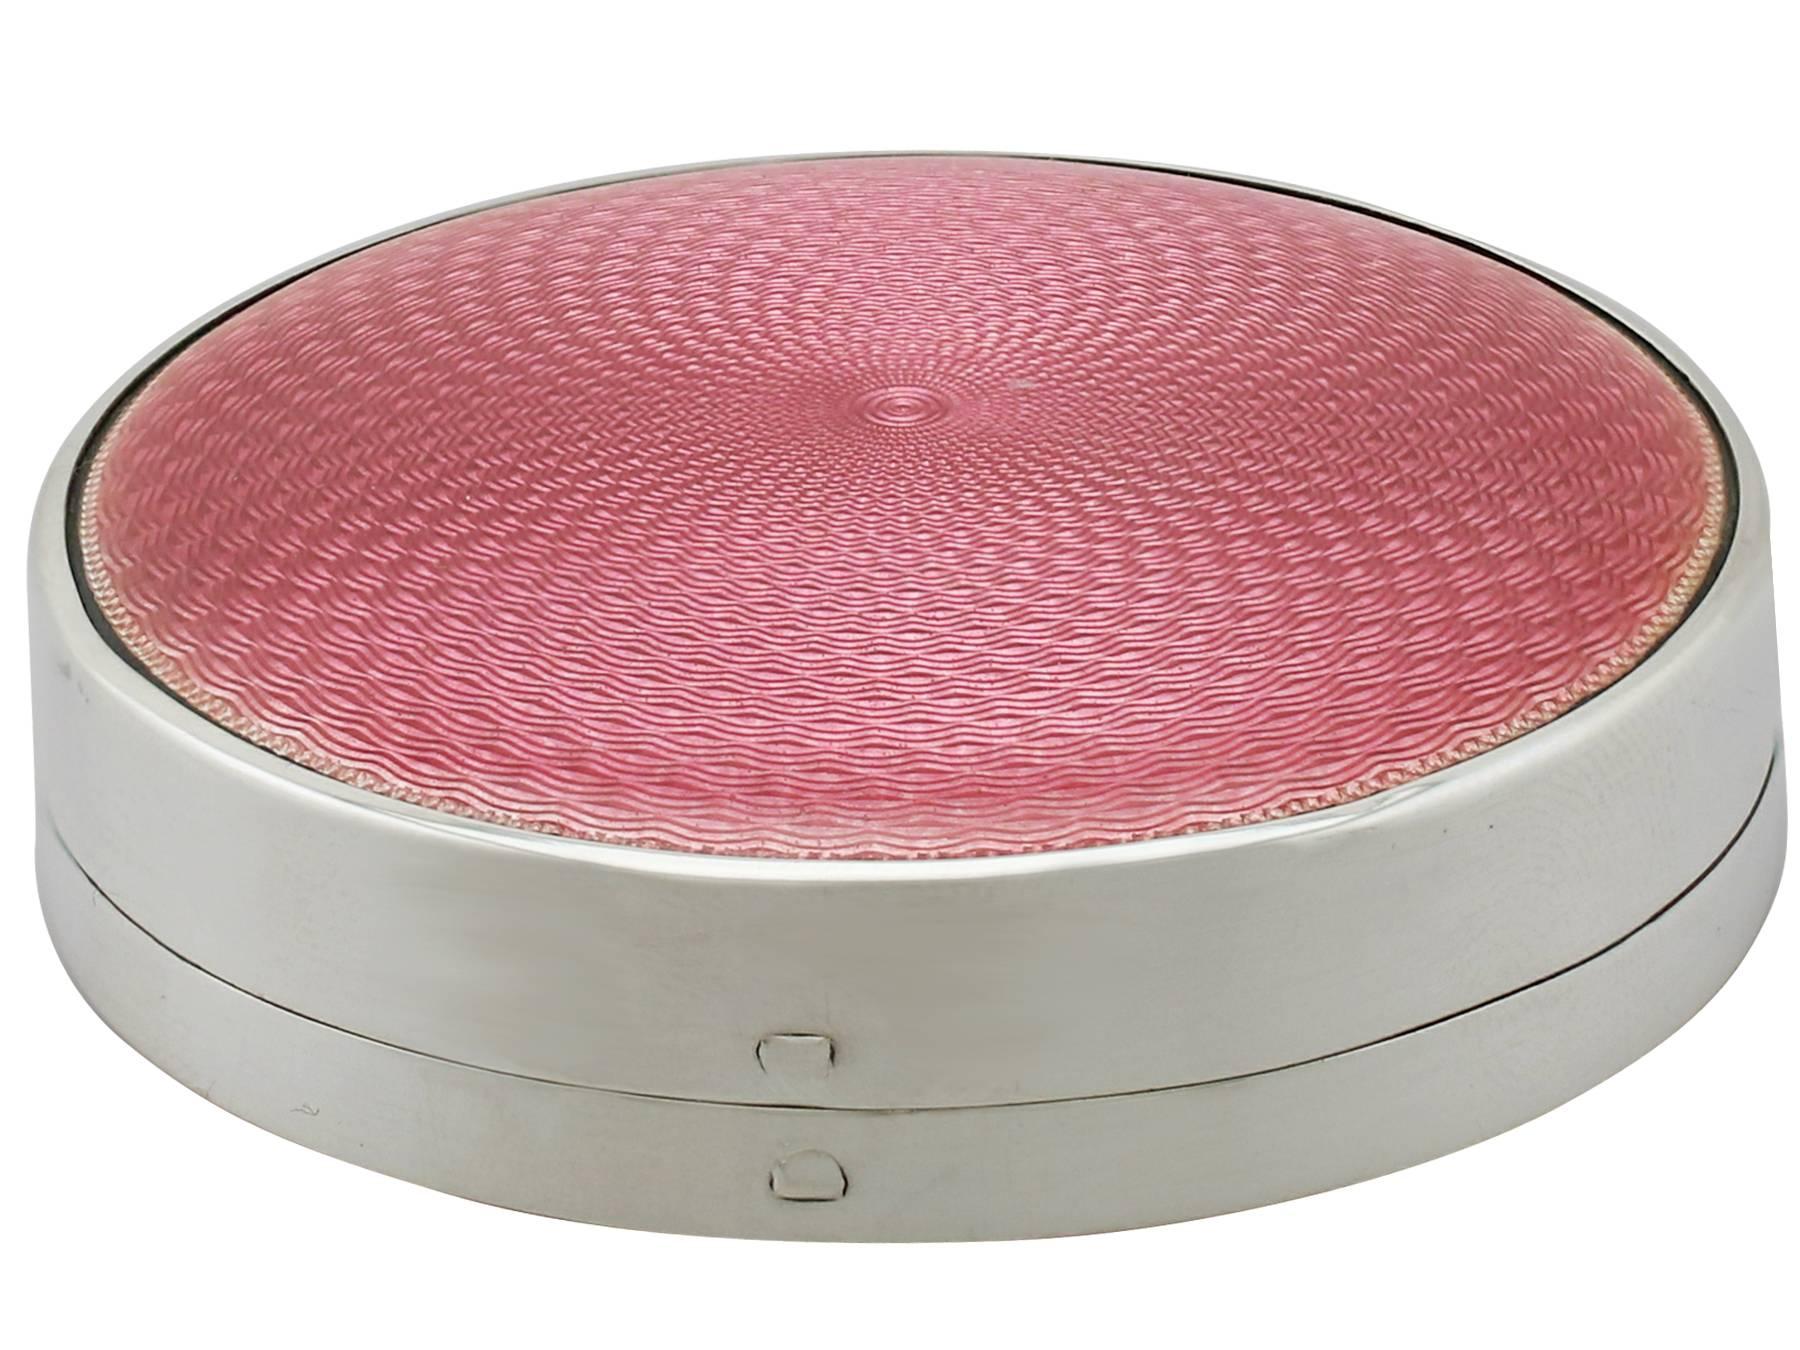 An exceptional, fine and impressive antique George V English sterling silver and enamel compact; an addition to our ornamental silverware collection.

This exceptional antique George V sterling silver and pink enamel compact has a cylindrical